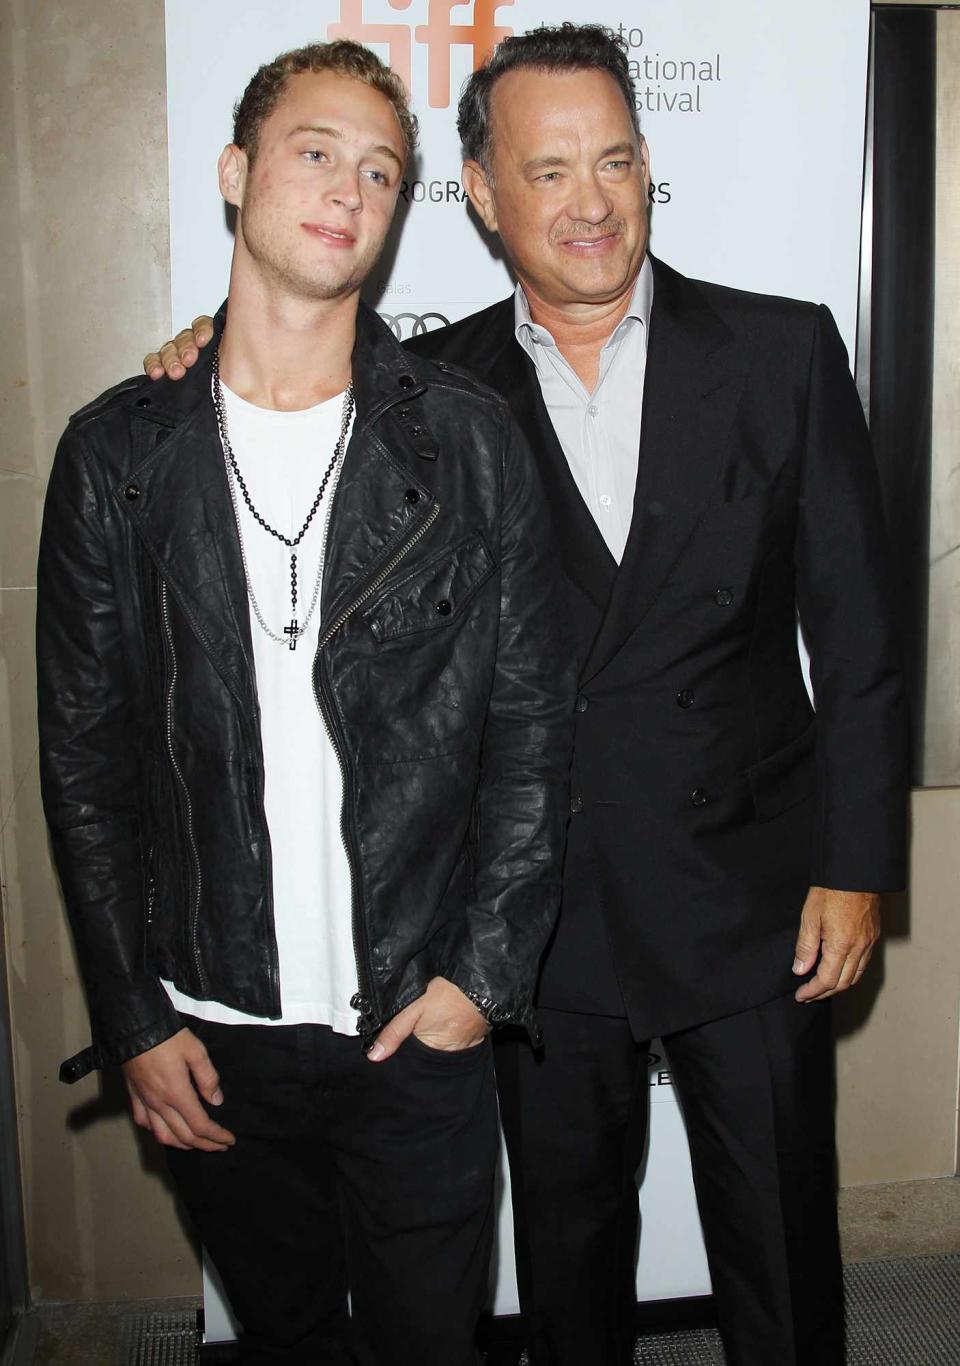 Tom Hanks (R) and his son Chet Hanks arrive at "Cloud Atlas" premiere during the 2012 Toronto International Film Festival held at Princess of Wales Theatre on September 8, 2012 in Toronto, Canada